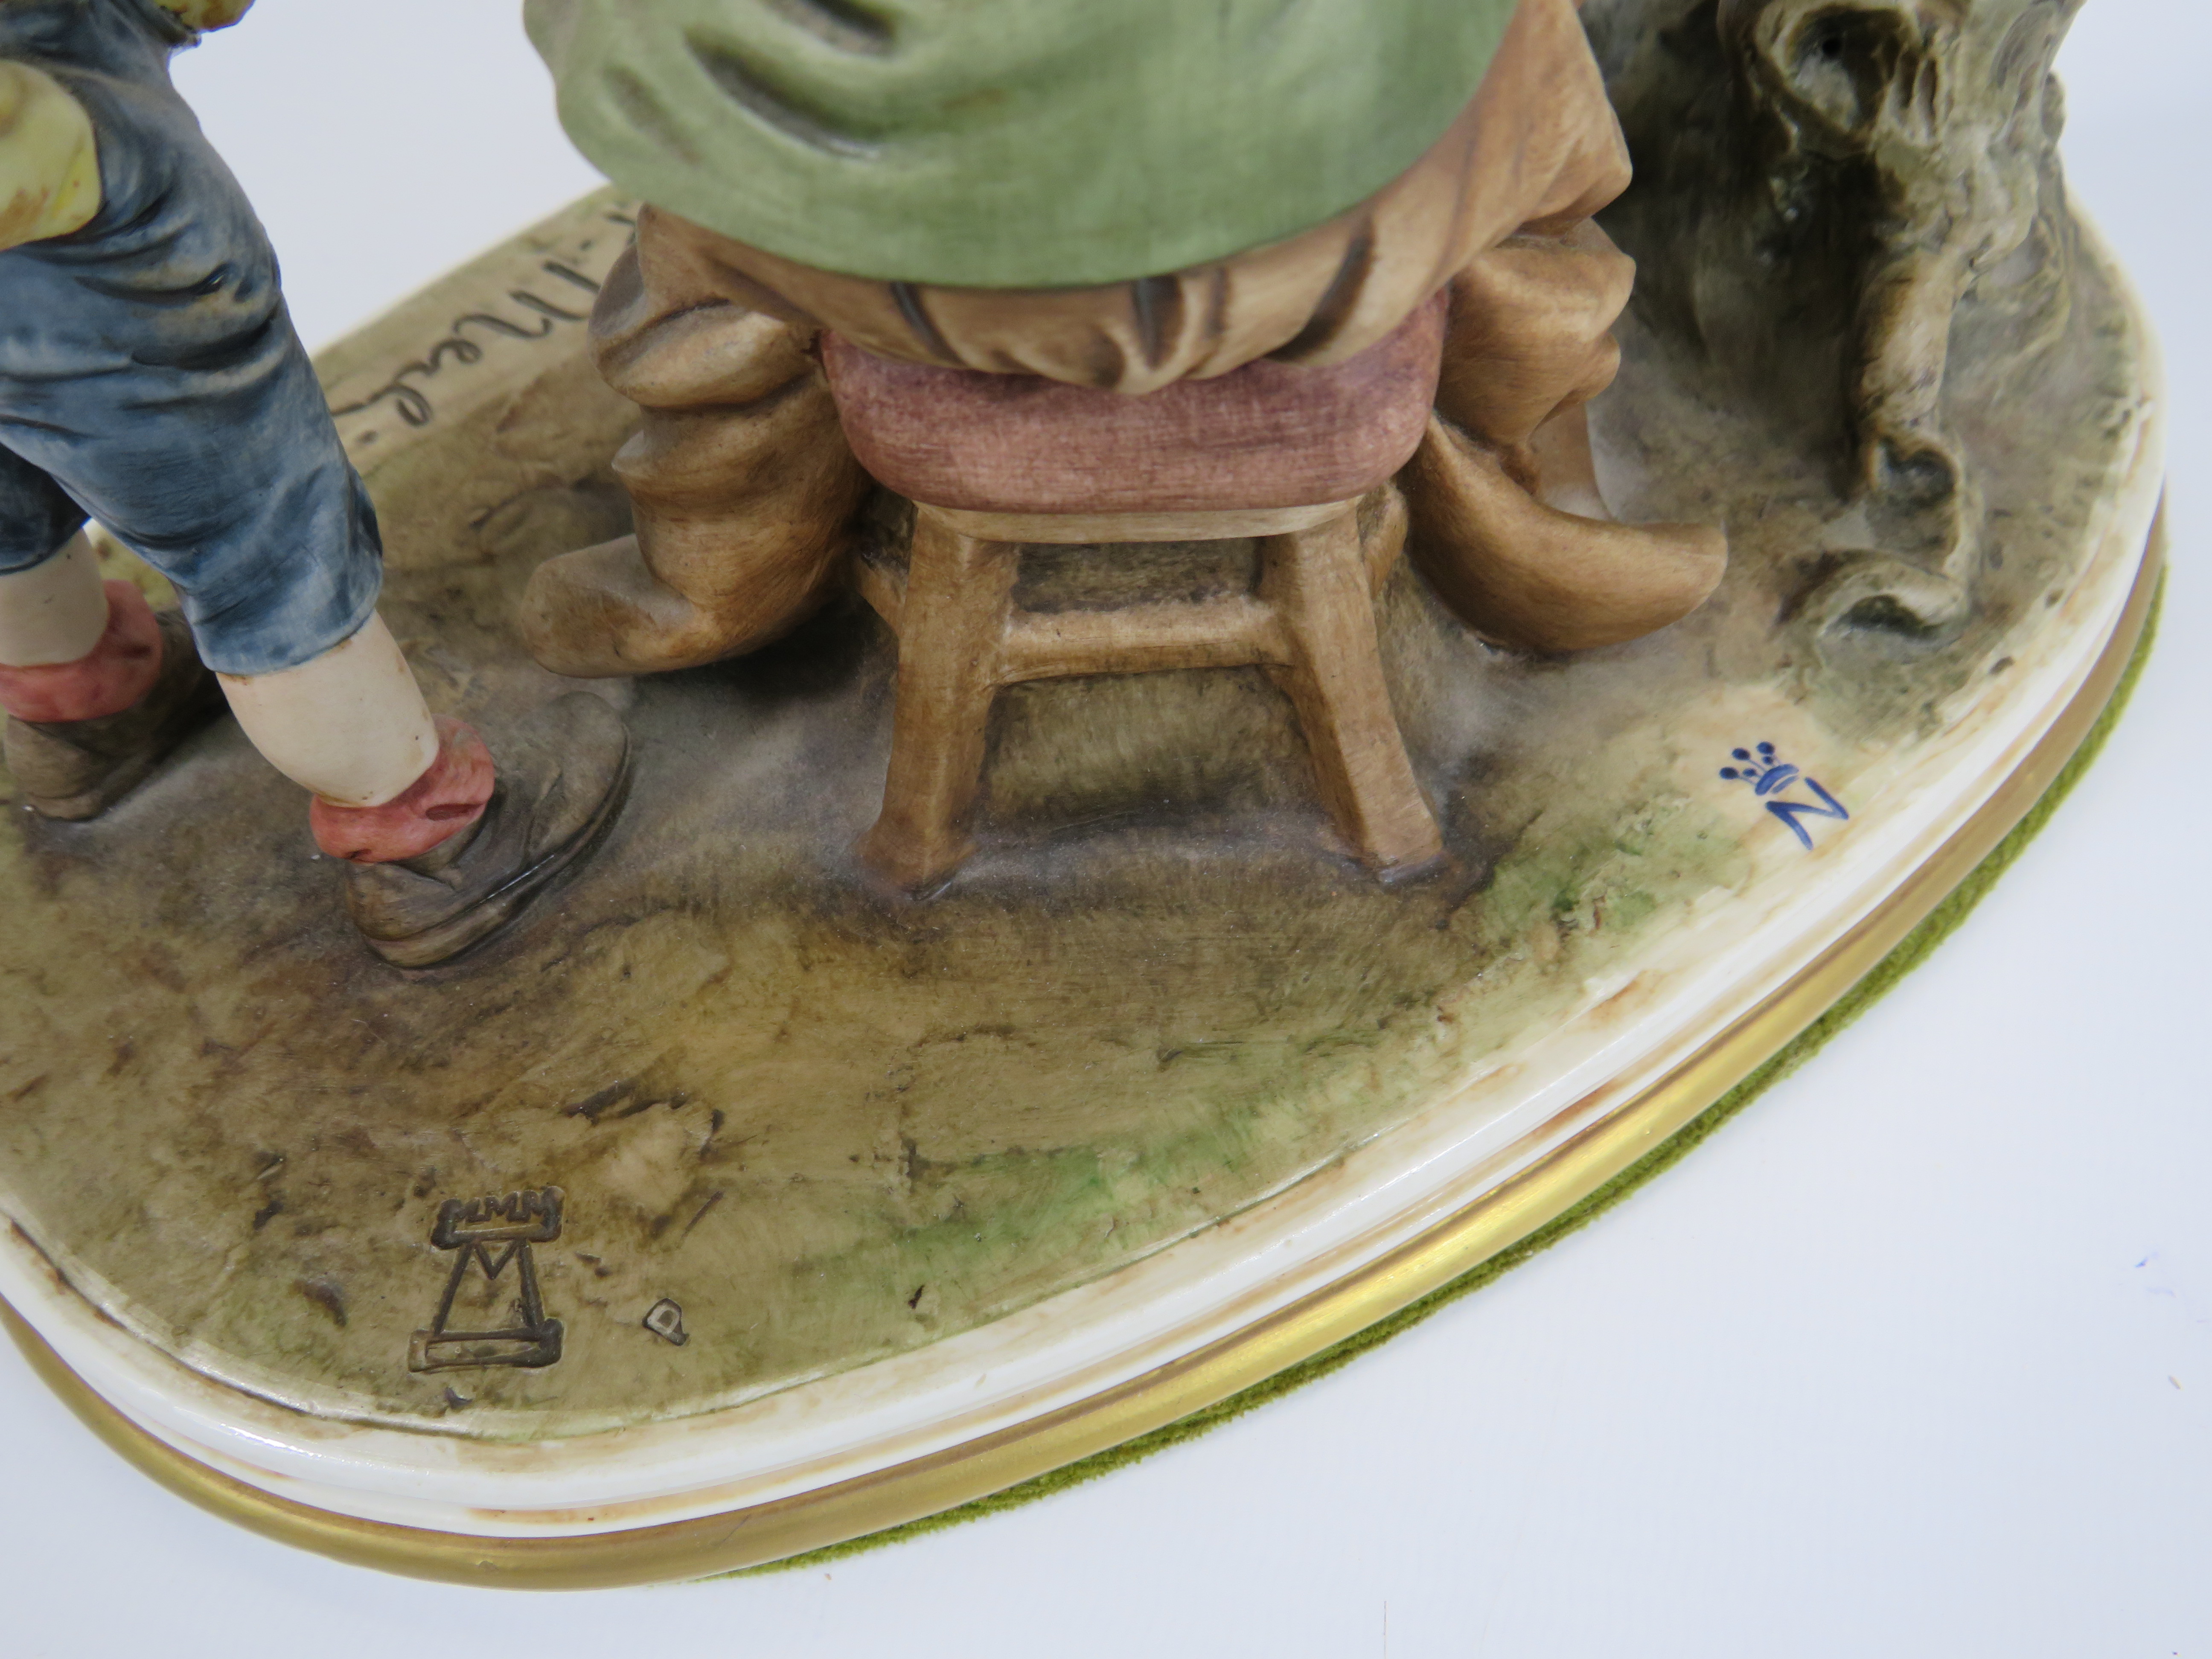 Capodimonte B Merli artist and boy figurine, missing end of paint brush, plus one other figurine - Image 6 of 6